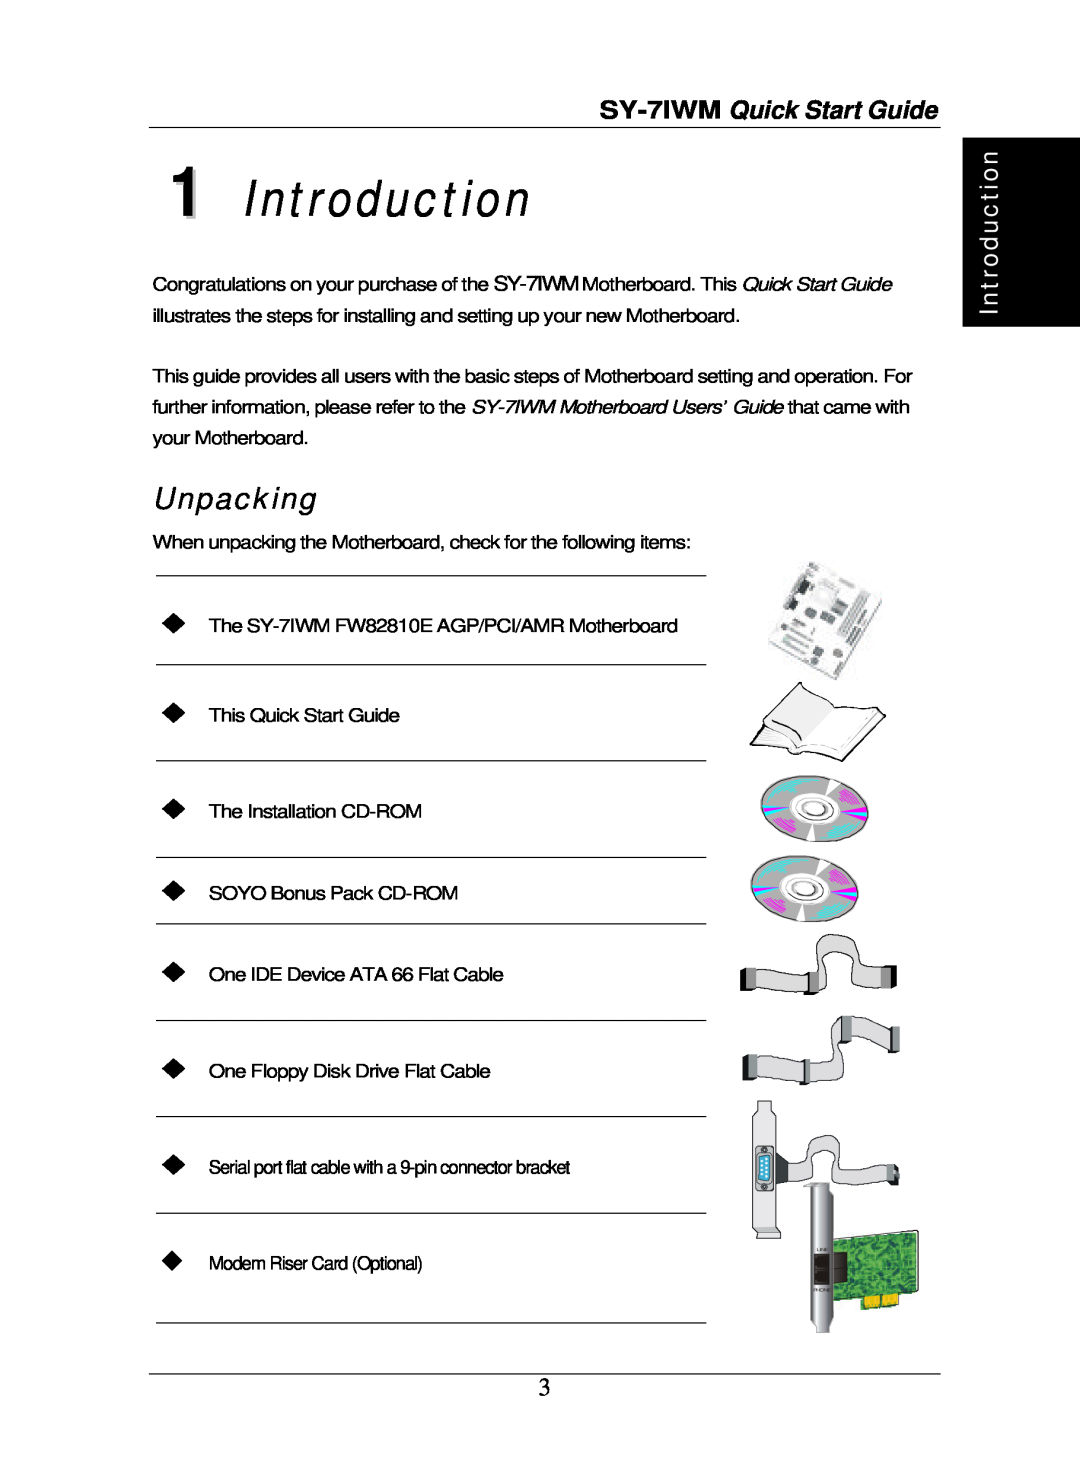 SOYO quick start Introduction, Unpacking, SY-7IWM Quick Start Guide 